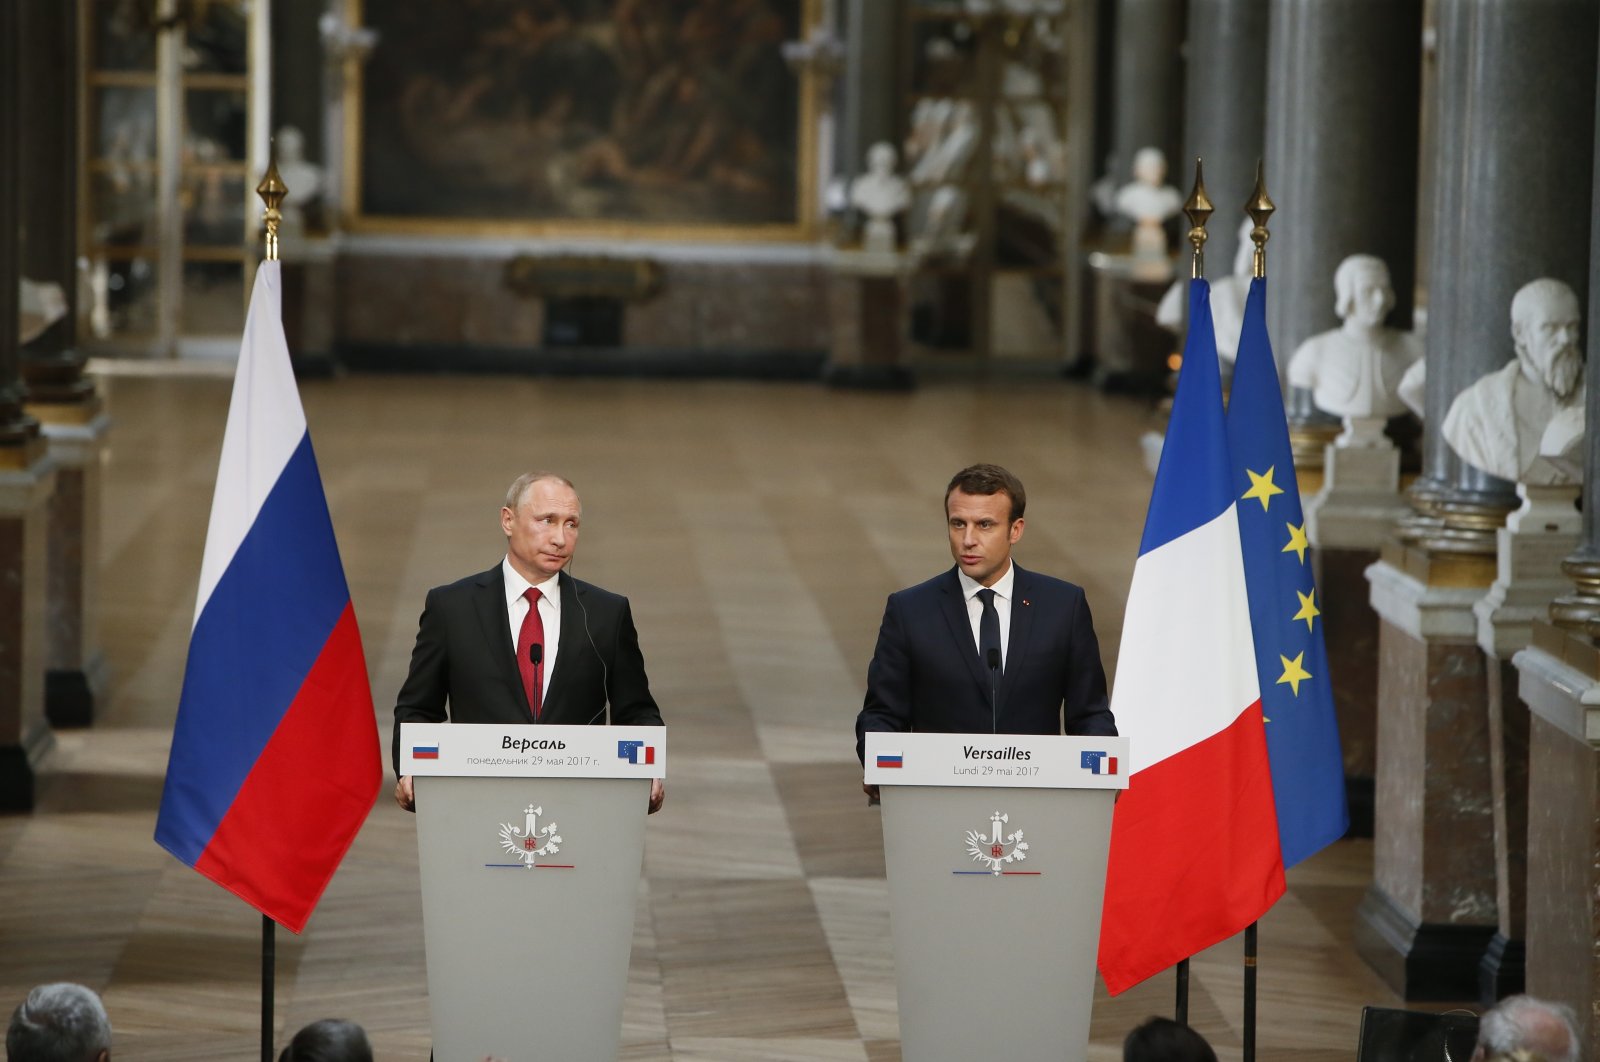 Russian President Vladimir Putin (L) and his French counterpart Emmanuel Macron hold a joint press conference at the Palace of Versailles as they meet for talks before the opening of an exhibition marking 300 years of diplomatic ties between the two countries, in Versailles, near Paris, France, May 29, 2017. (AP File Photo)